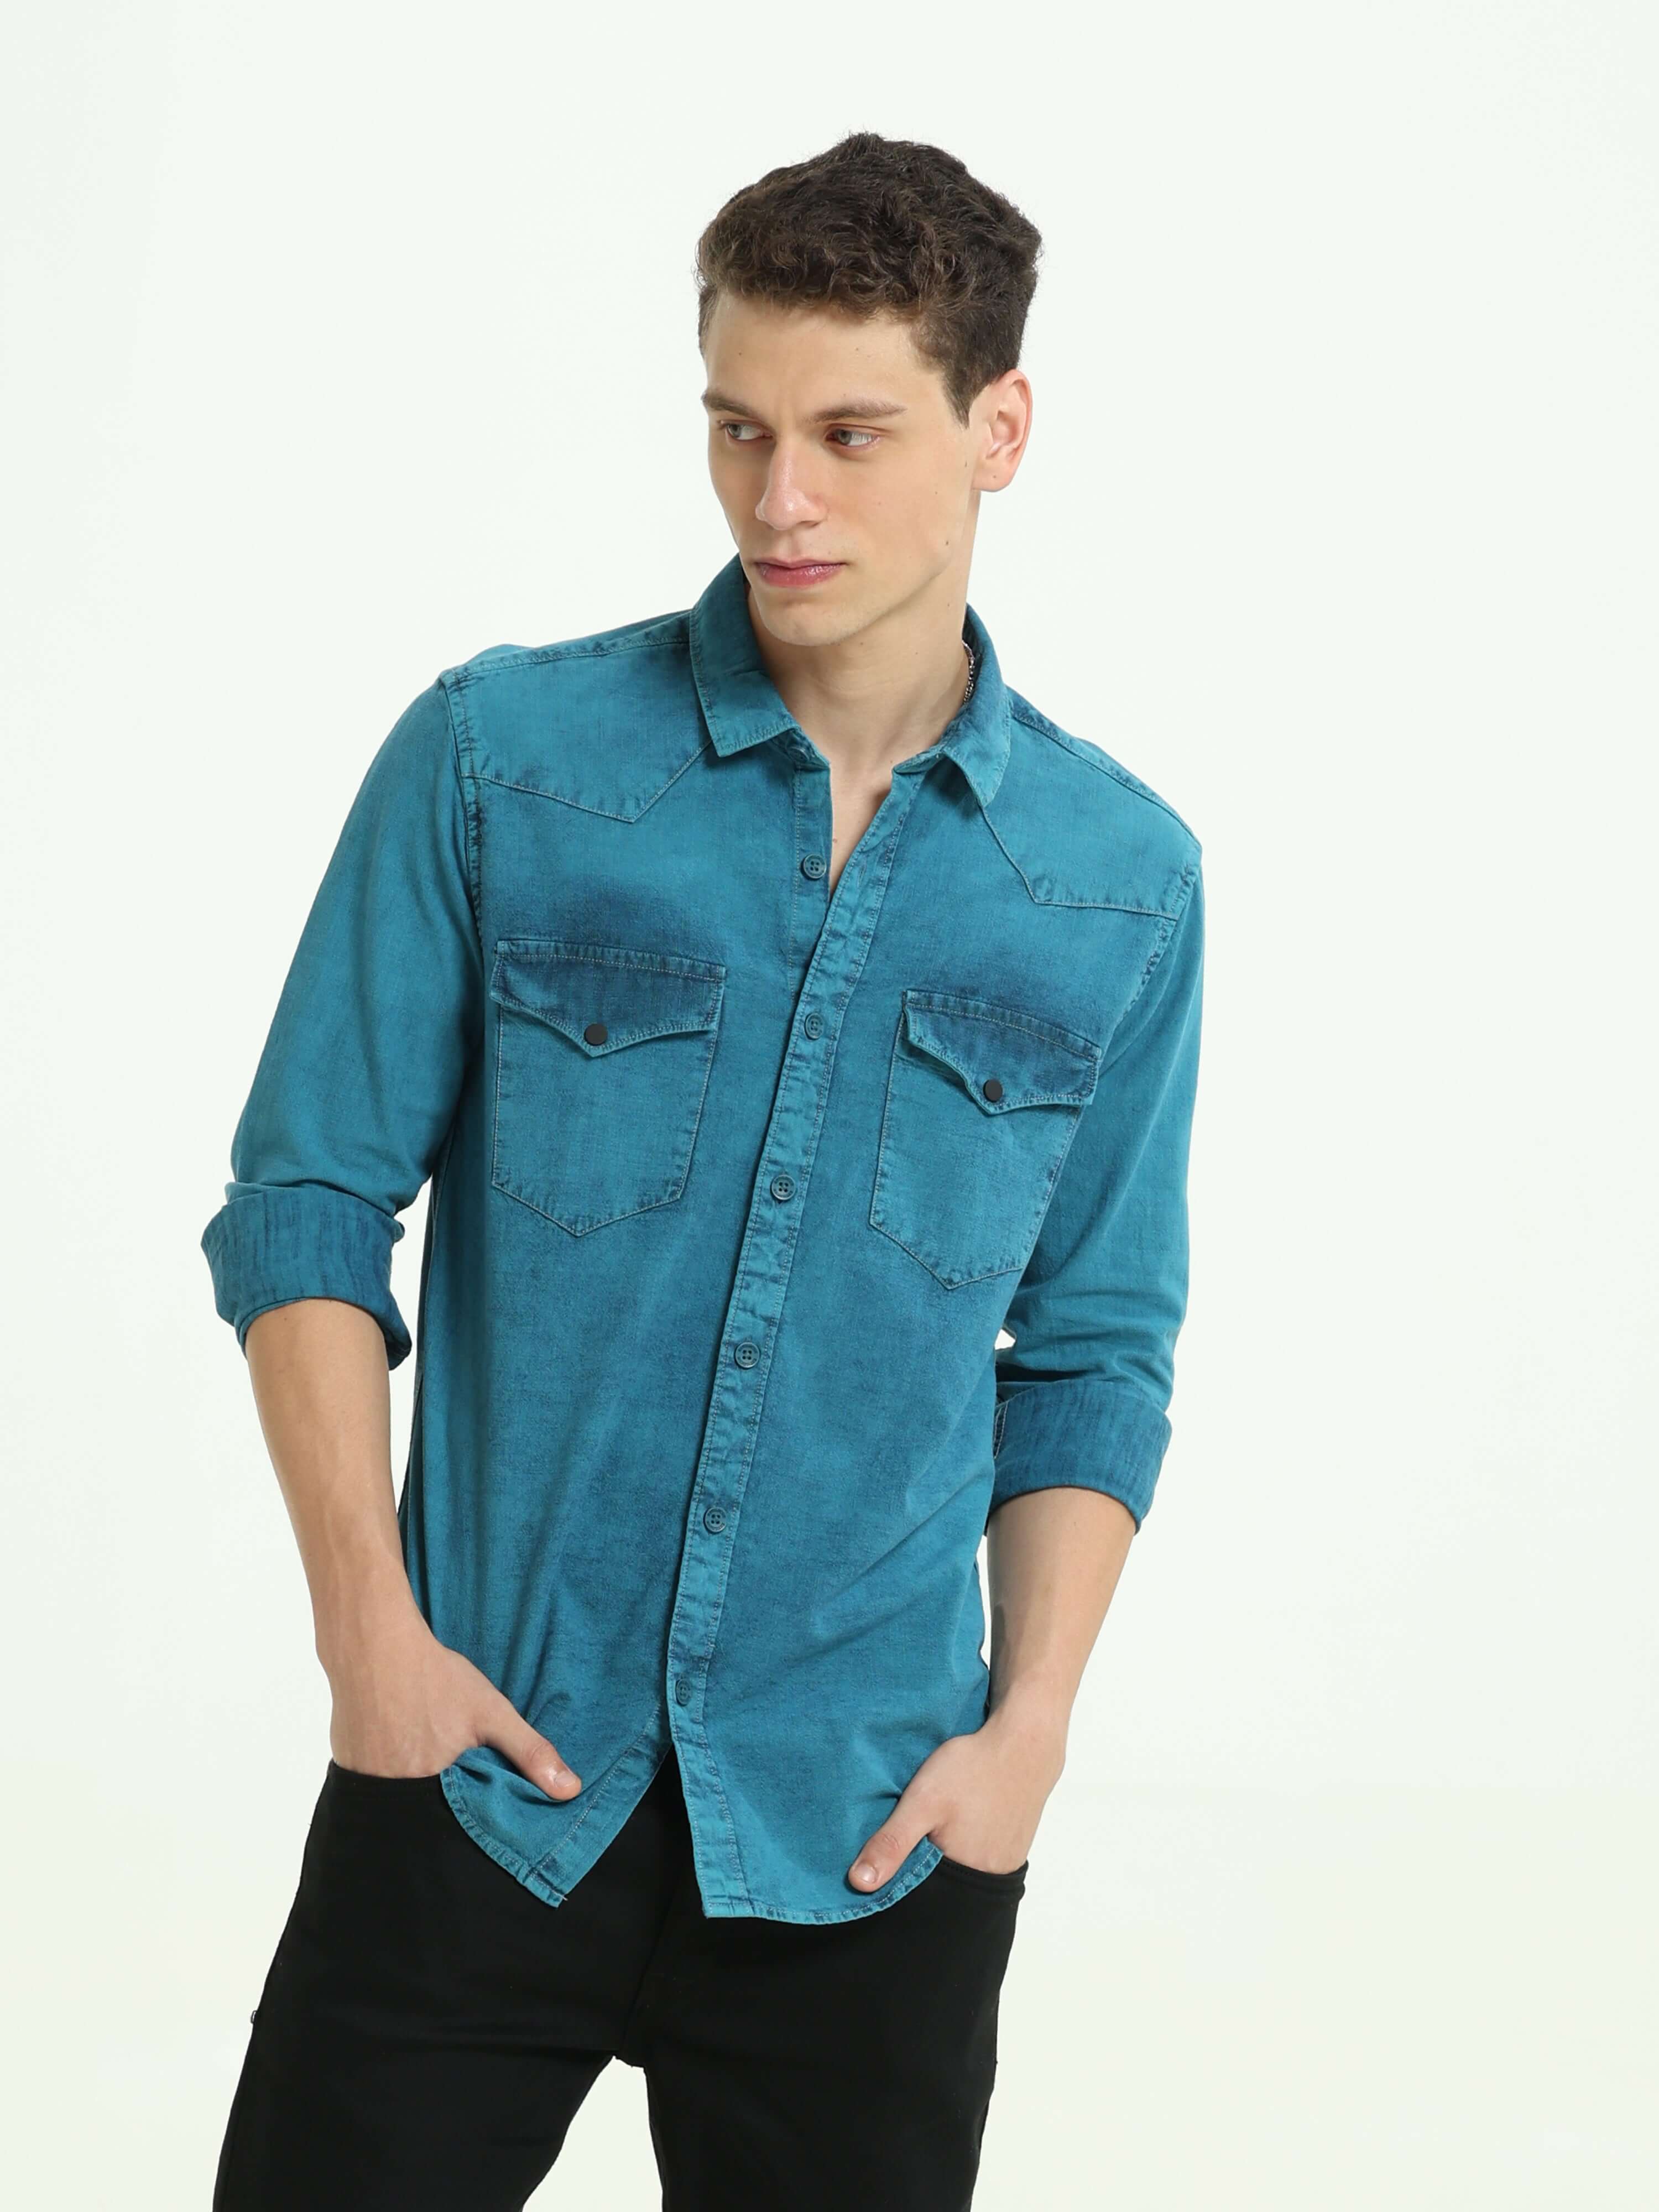 Denim Indigo-Teal over-dyed casual shirt shop online at Estilocus. • 100% premium Denim• Full-sleeve solid shirt• Cut and sew placket• Regular collar• Double button round cuff's.• Single pocket • Cut and sew front panel with high-quality print• Curved hem